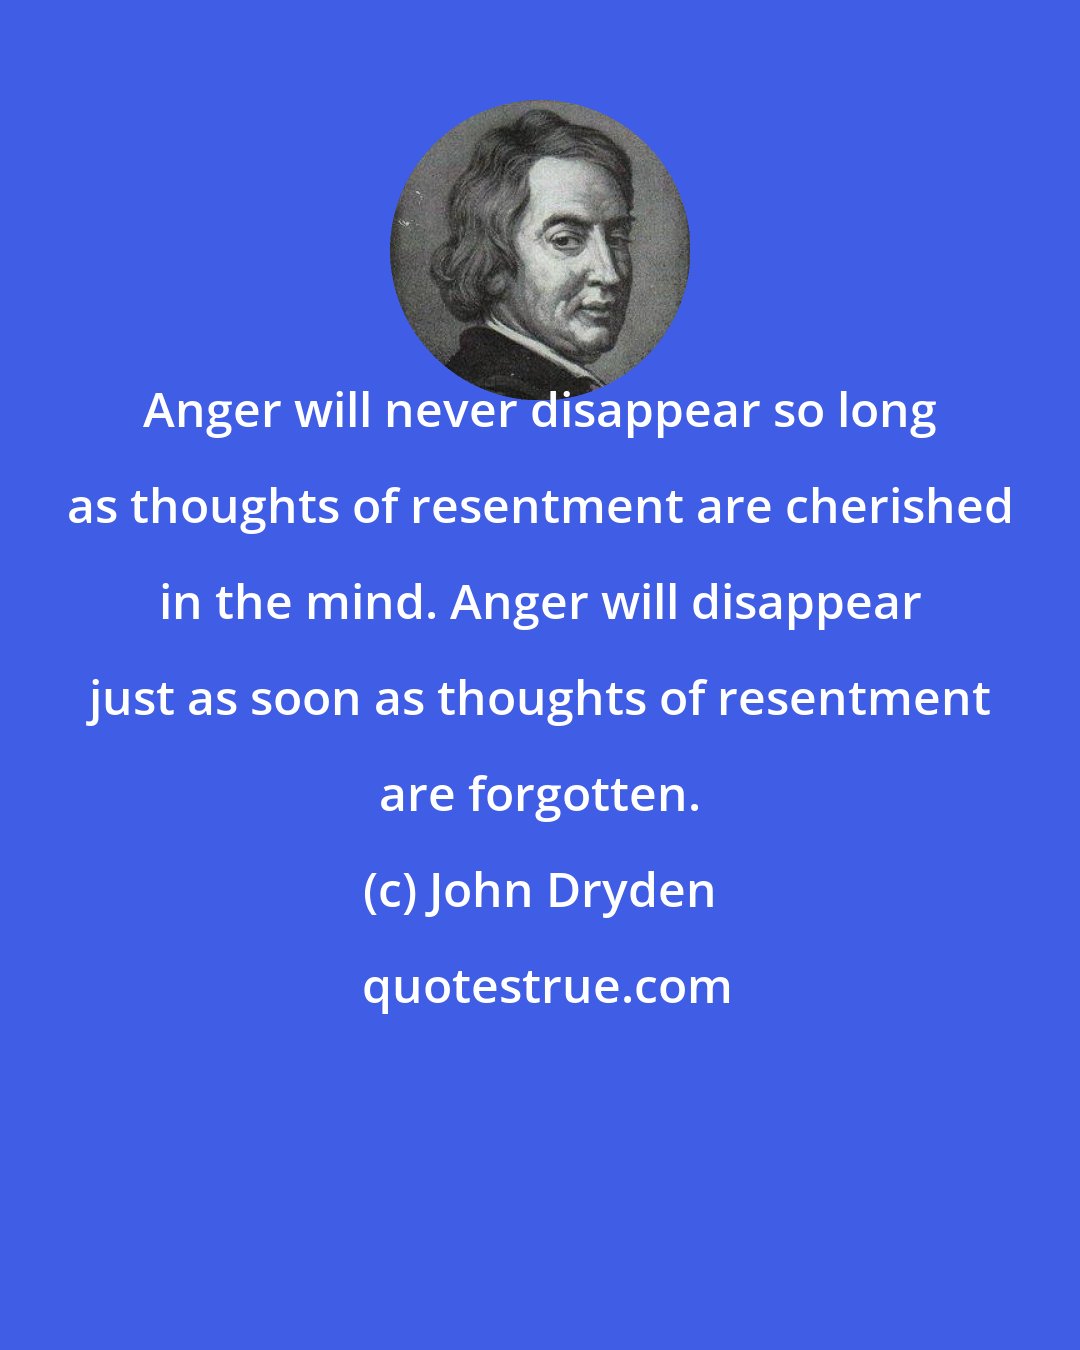 John Dryden: Anger will never disappear so long as thoughts of resentment are cherished in the mind. Anger will disappear just as soon as thoughts of resentment are forgotten.